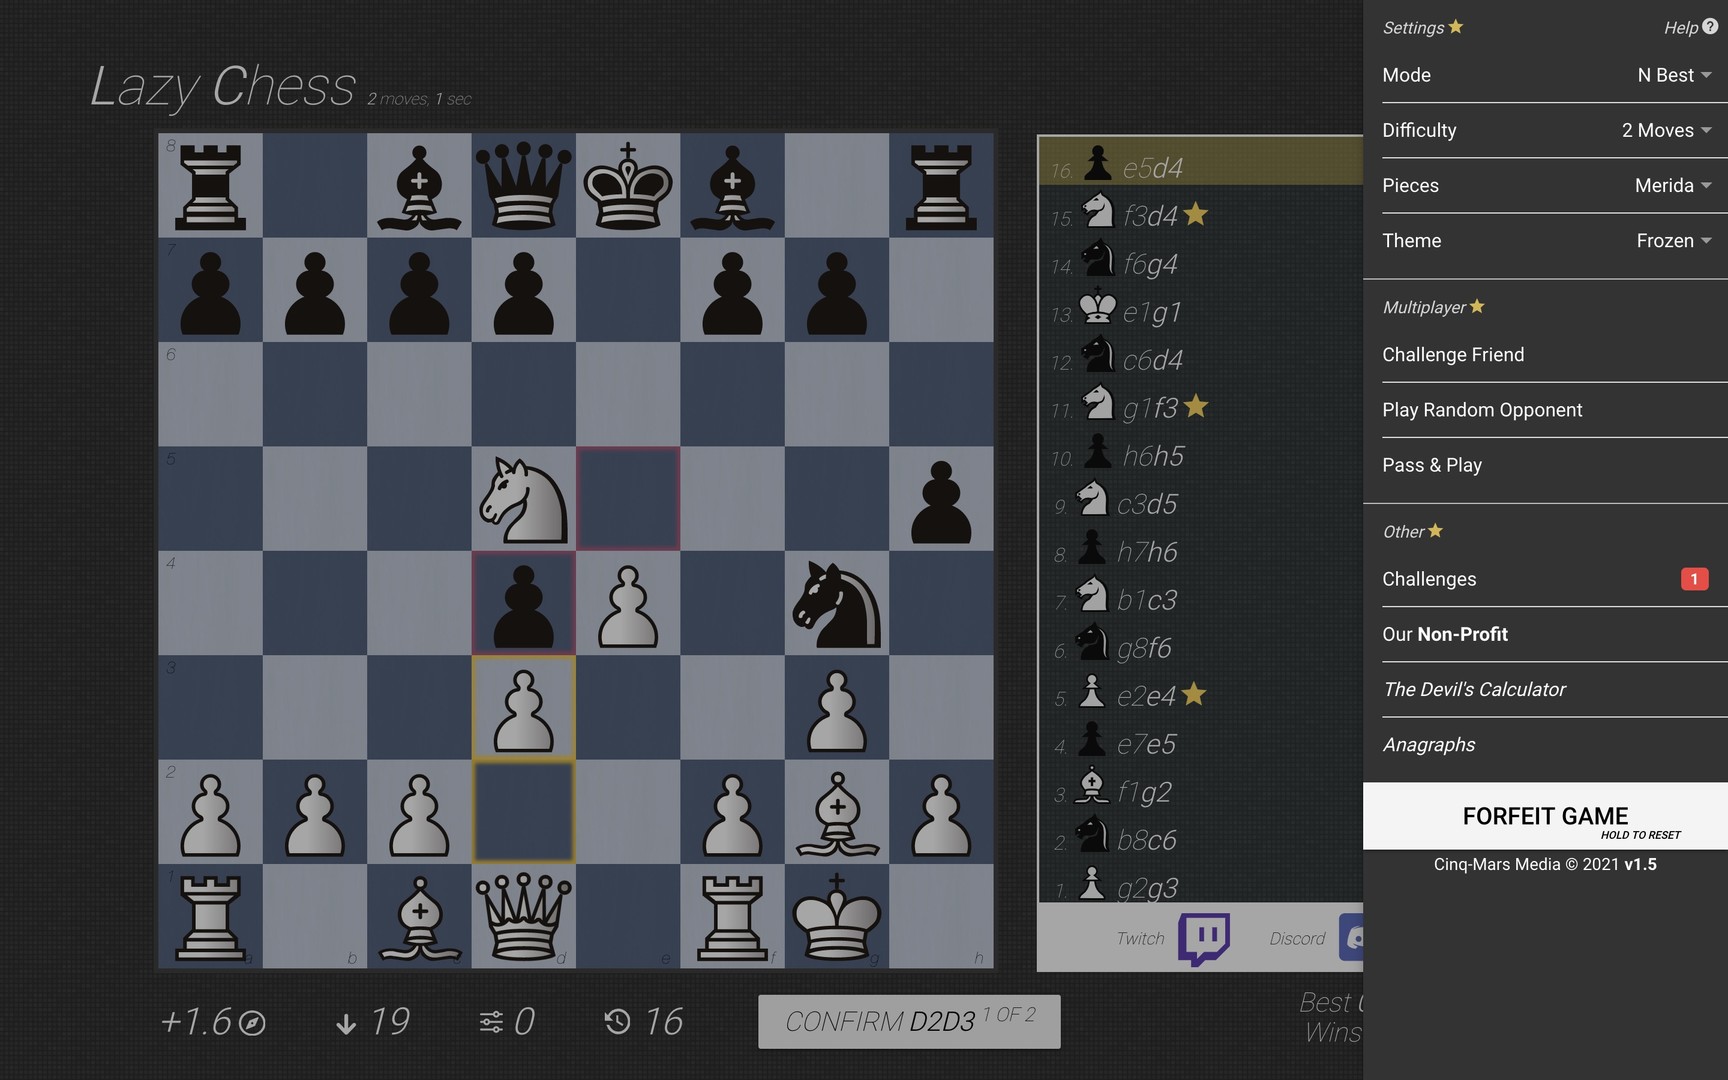 Lazy Chess on Steam